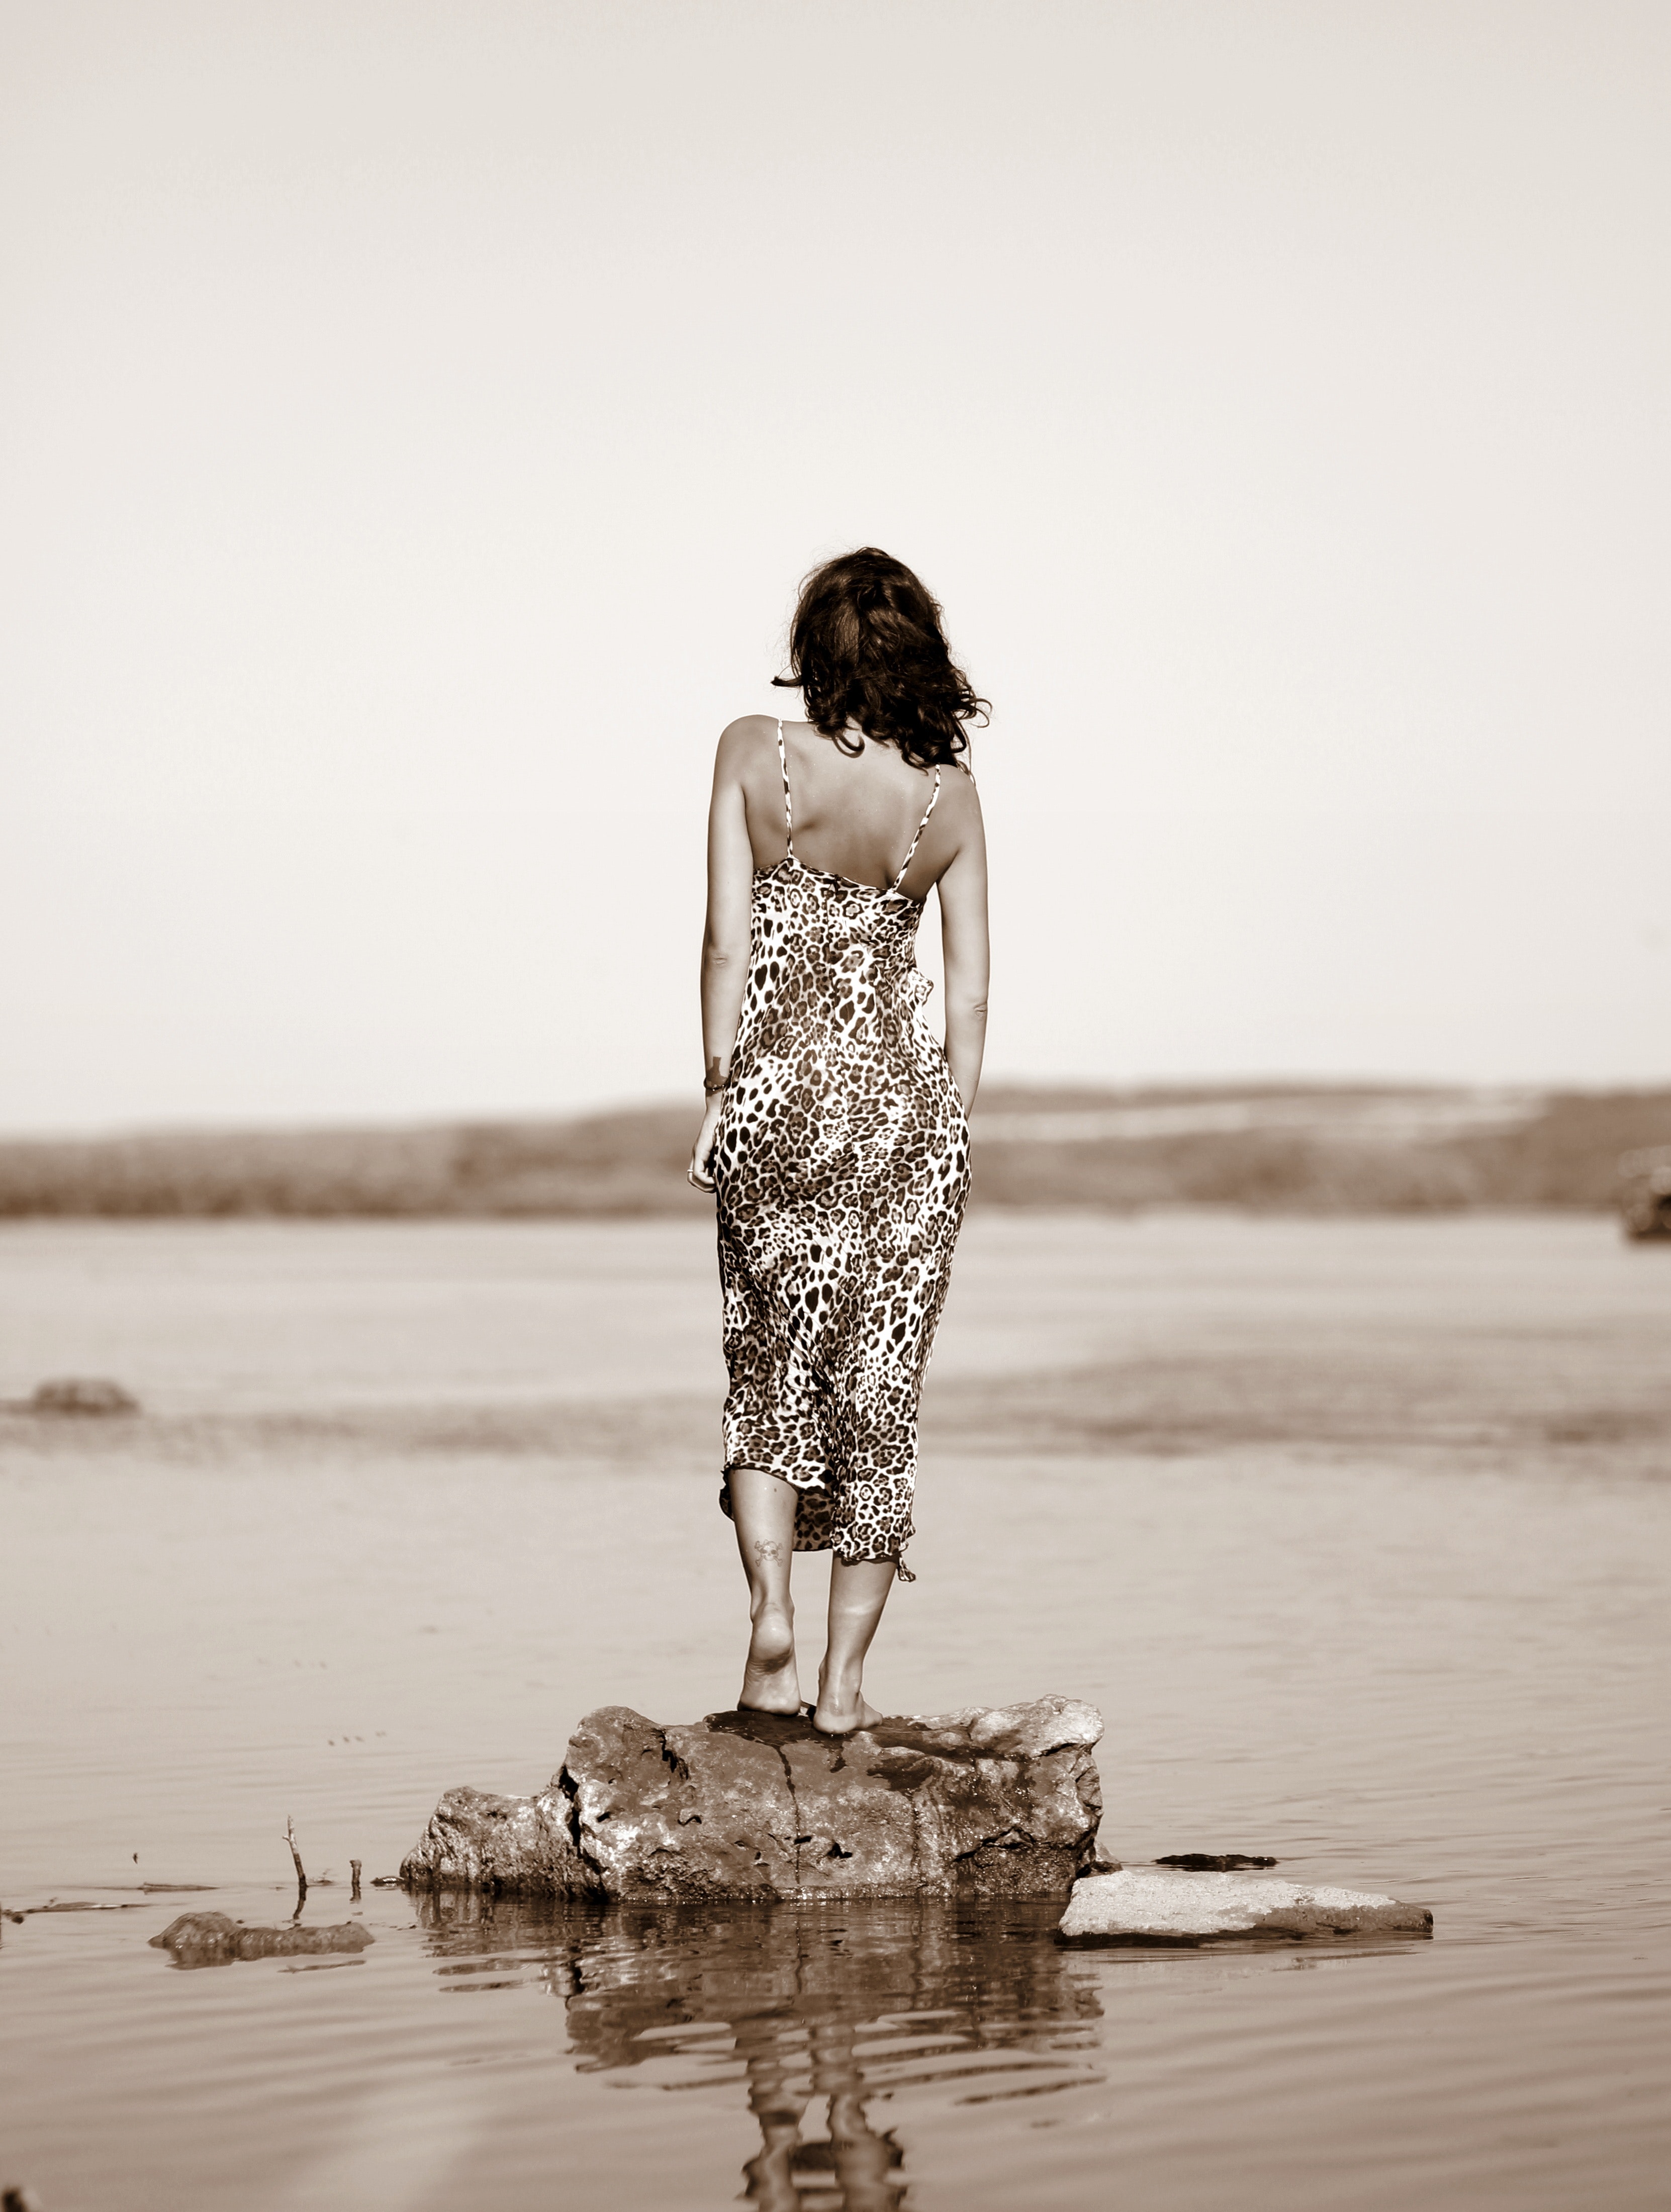 Woman wearing leopard print dress standing on stone on body of water photo